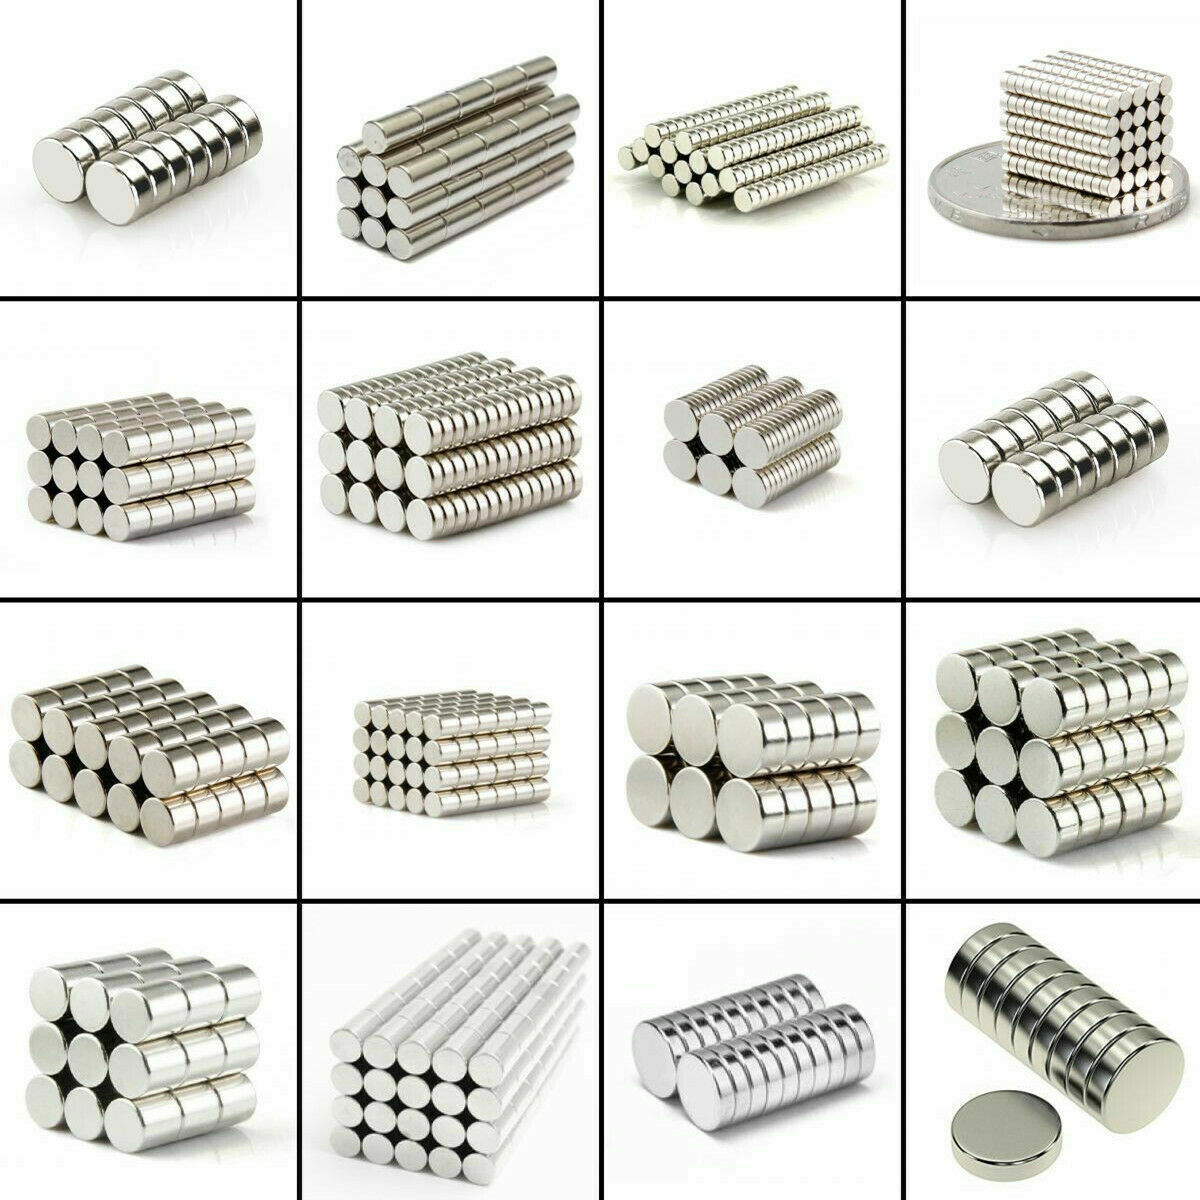 Wholesale Max Magnets Super Strong Large Block Magnet 2/"x1/"x3//8/" Rare Earth N50